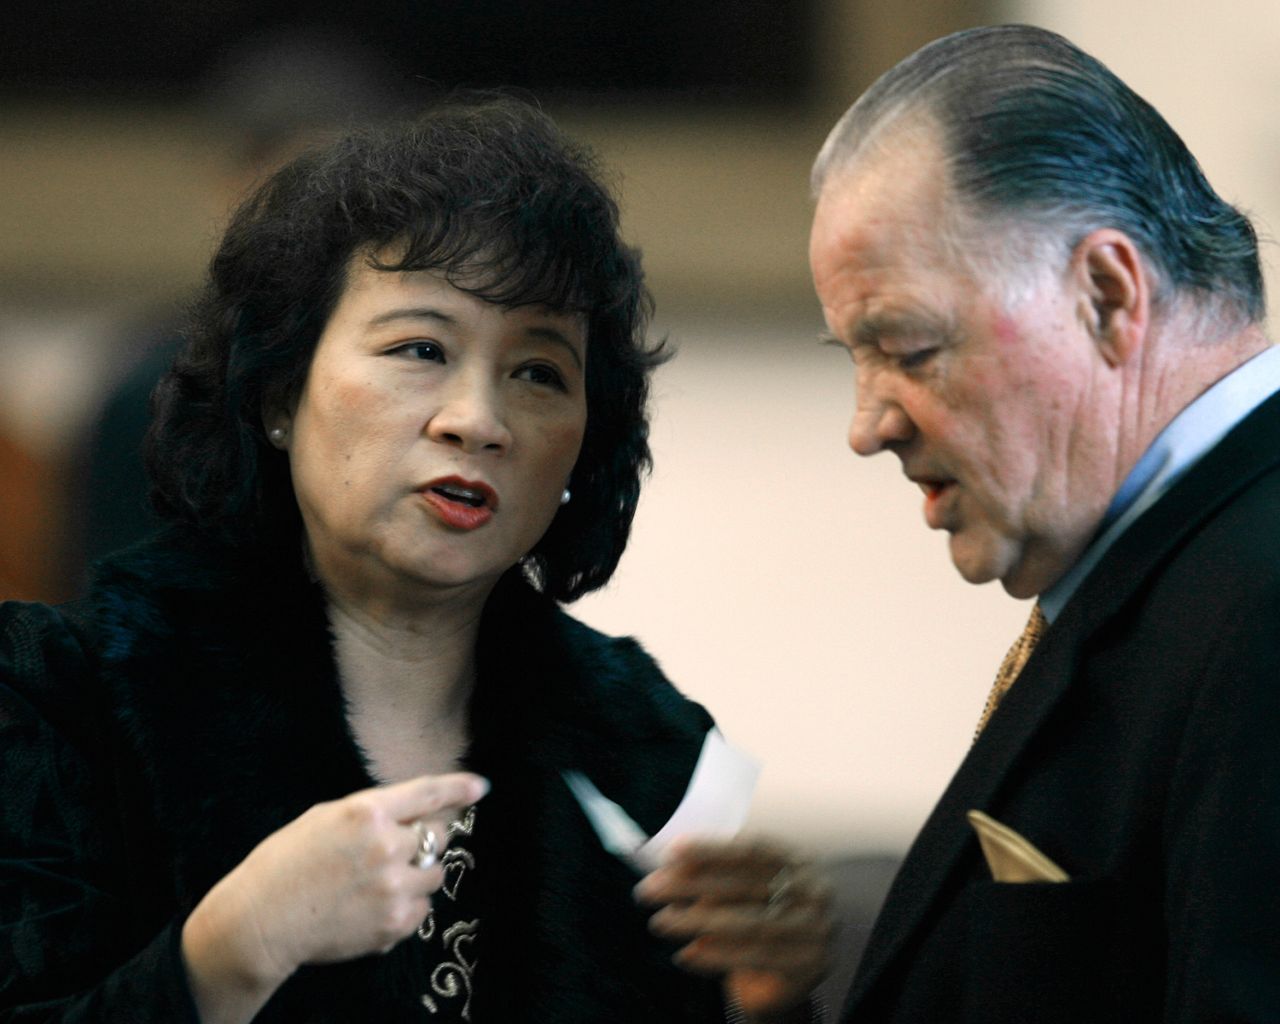 Rep. Angie Chen Button, R-Dallas, left, talks with Rep. Tommy Merritt, R-Longview, right, during the session in the Texas House of Representatives Thursday, Jan. 15, 2009, in Austin, Texas. (AP Photo/Harry Cabluck)